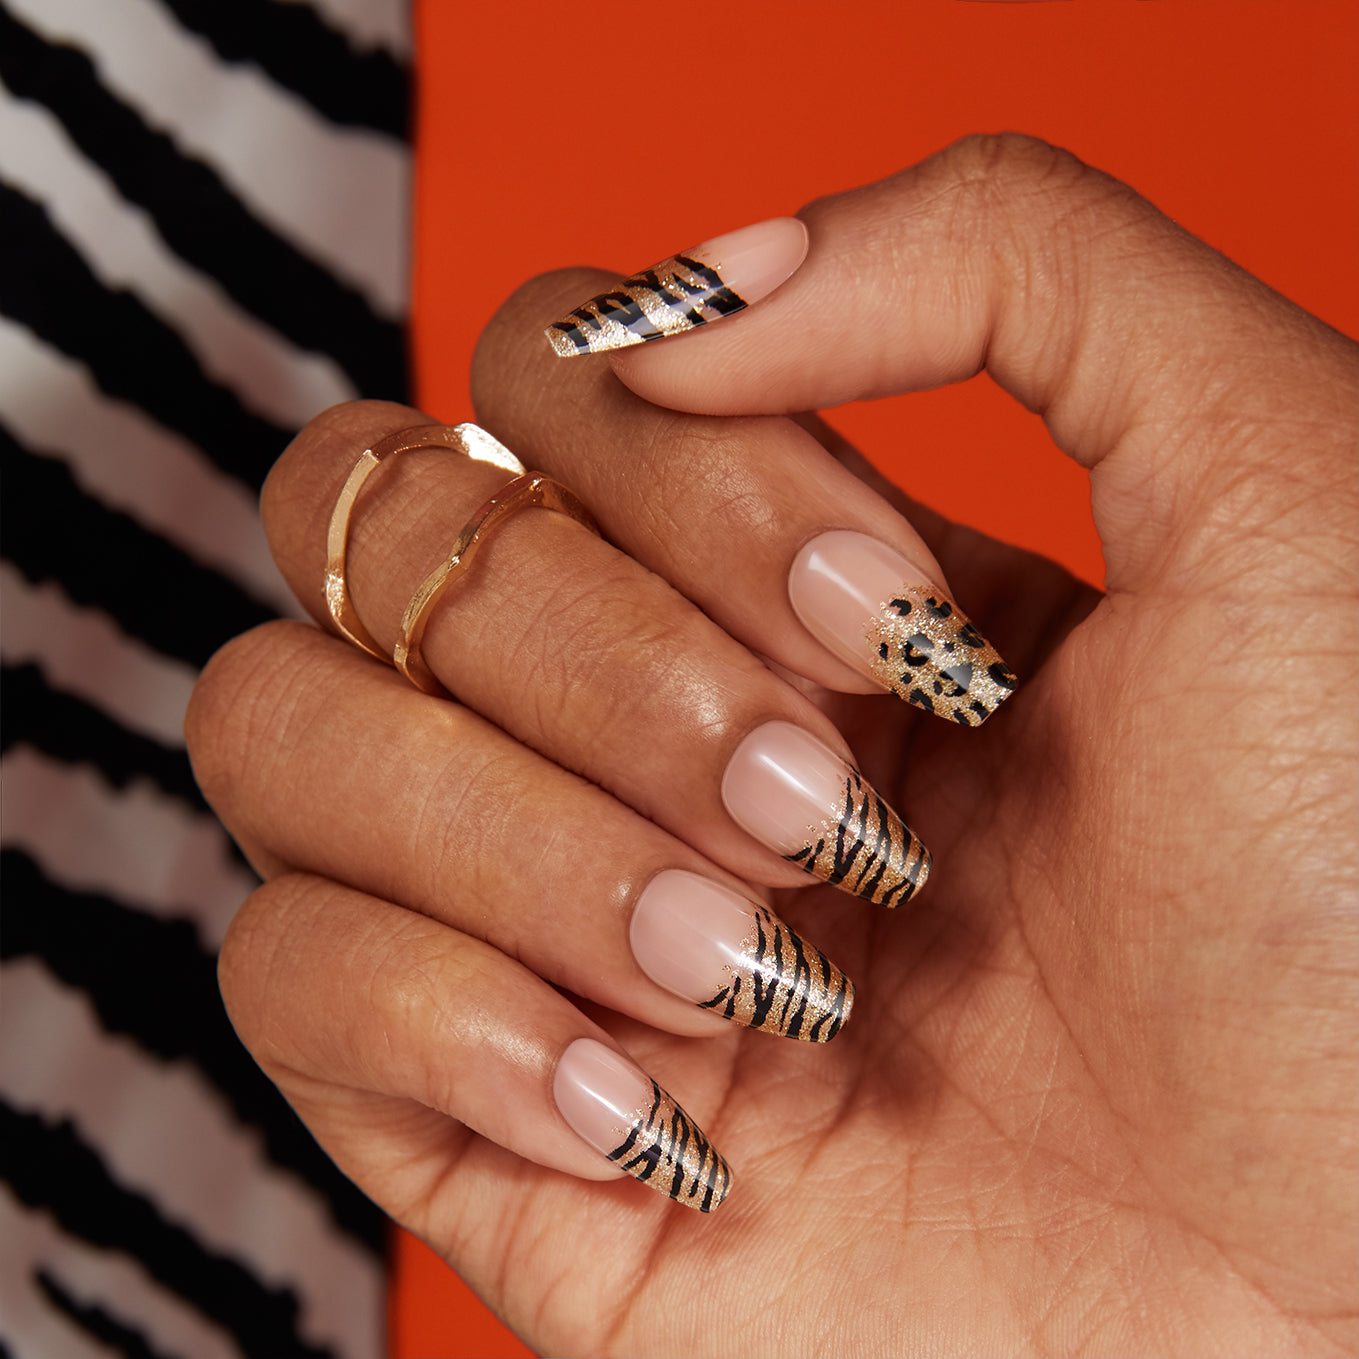 The 10 Best Spring Trends 2023 - Spring '23 Manicure Ideas